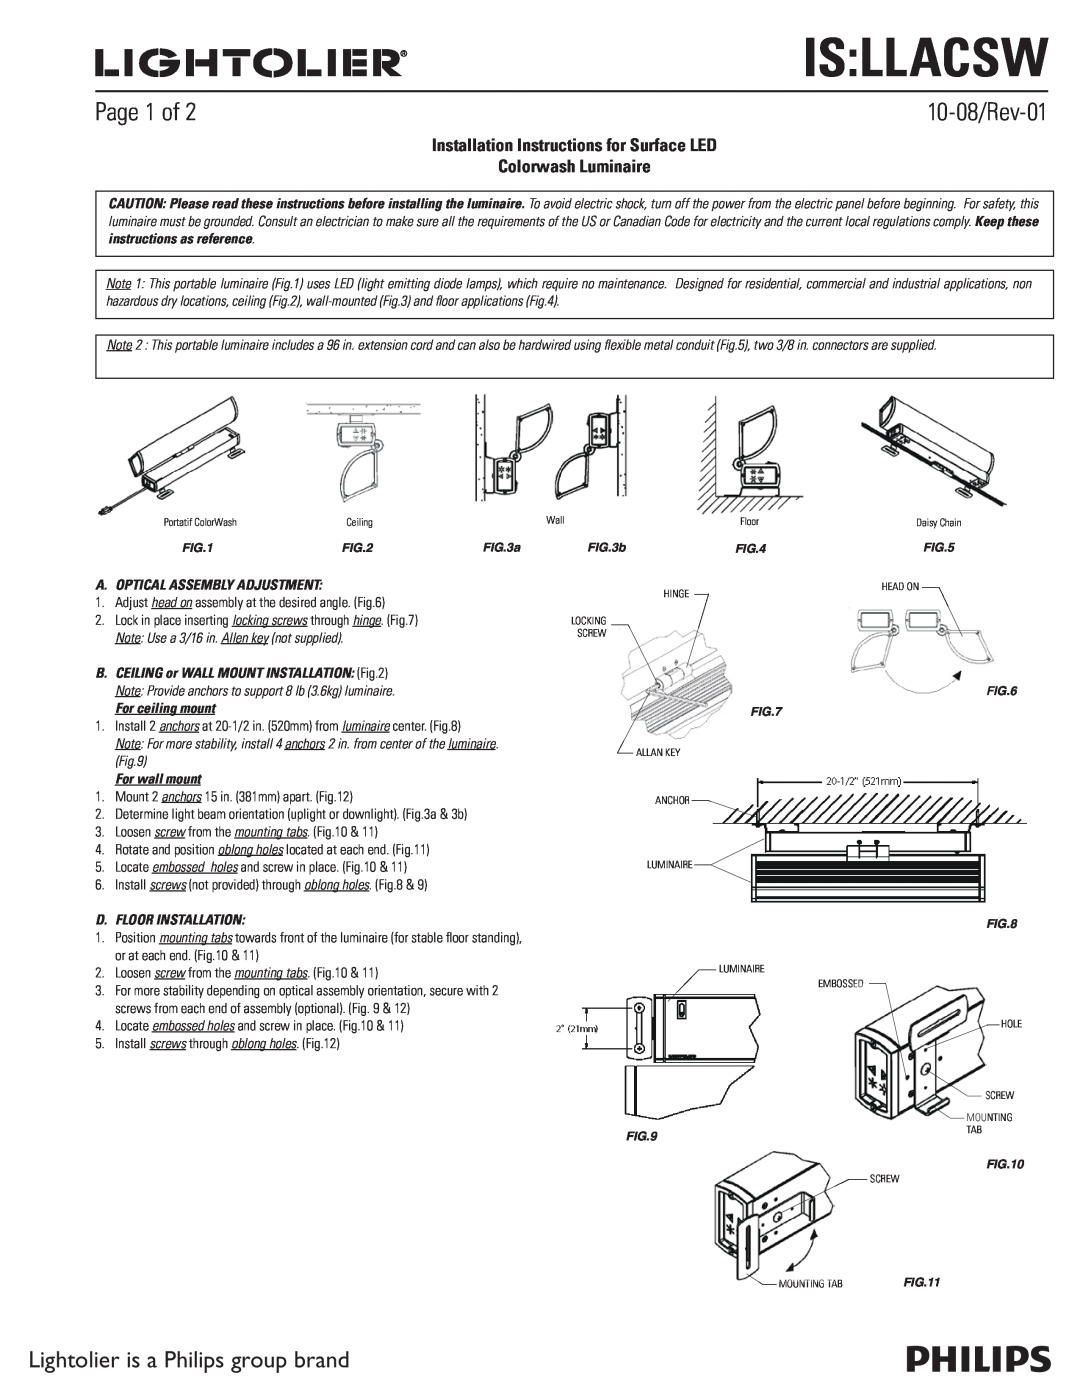 Lightolier IS:LLACSW installation instructions 10-08/Rev-01, Page 1 of, Lightolier is a Philips group brand, Is Llacsw 